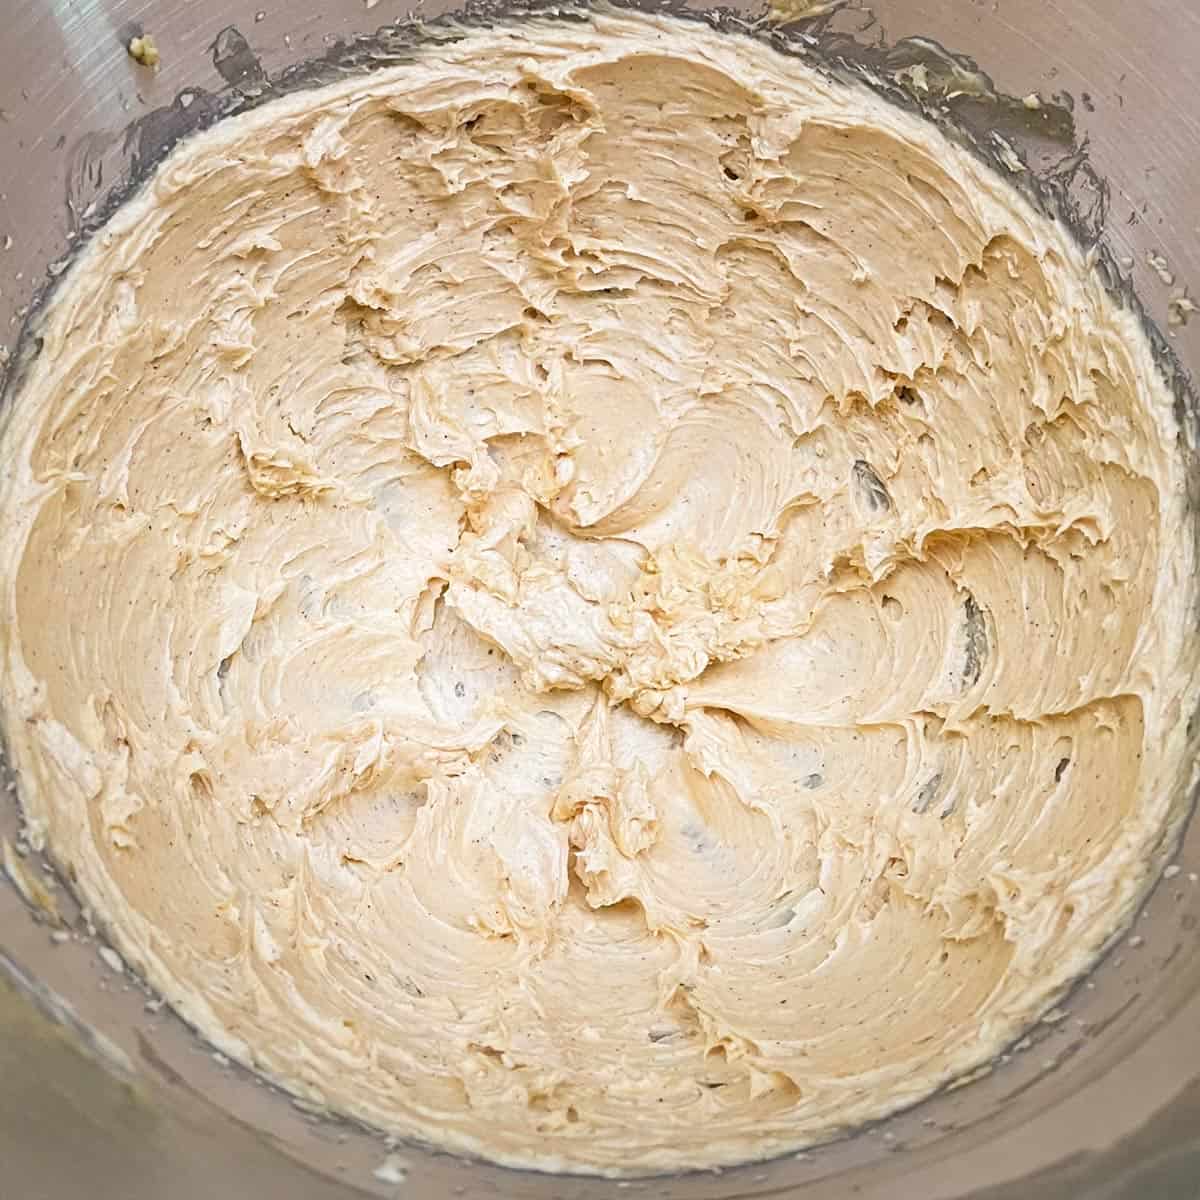 Mixed pumpkin frosting ready to be added to the cookies